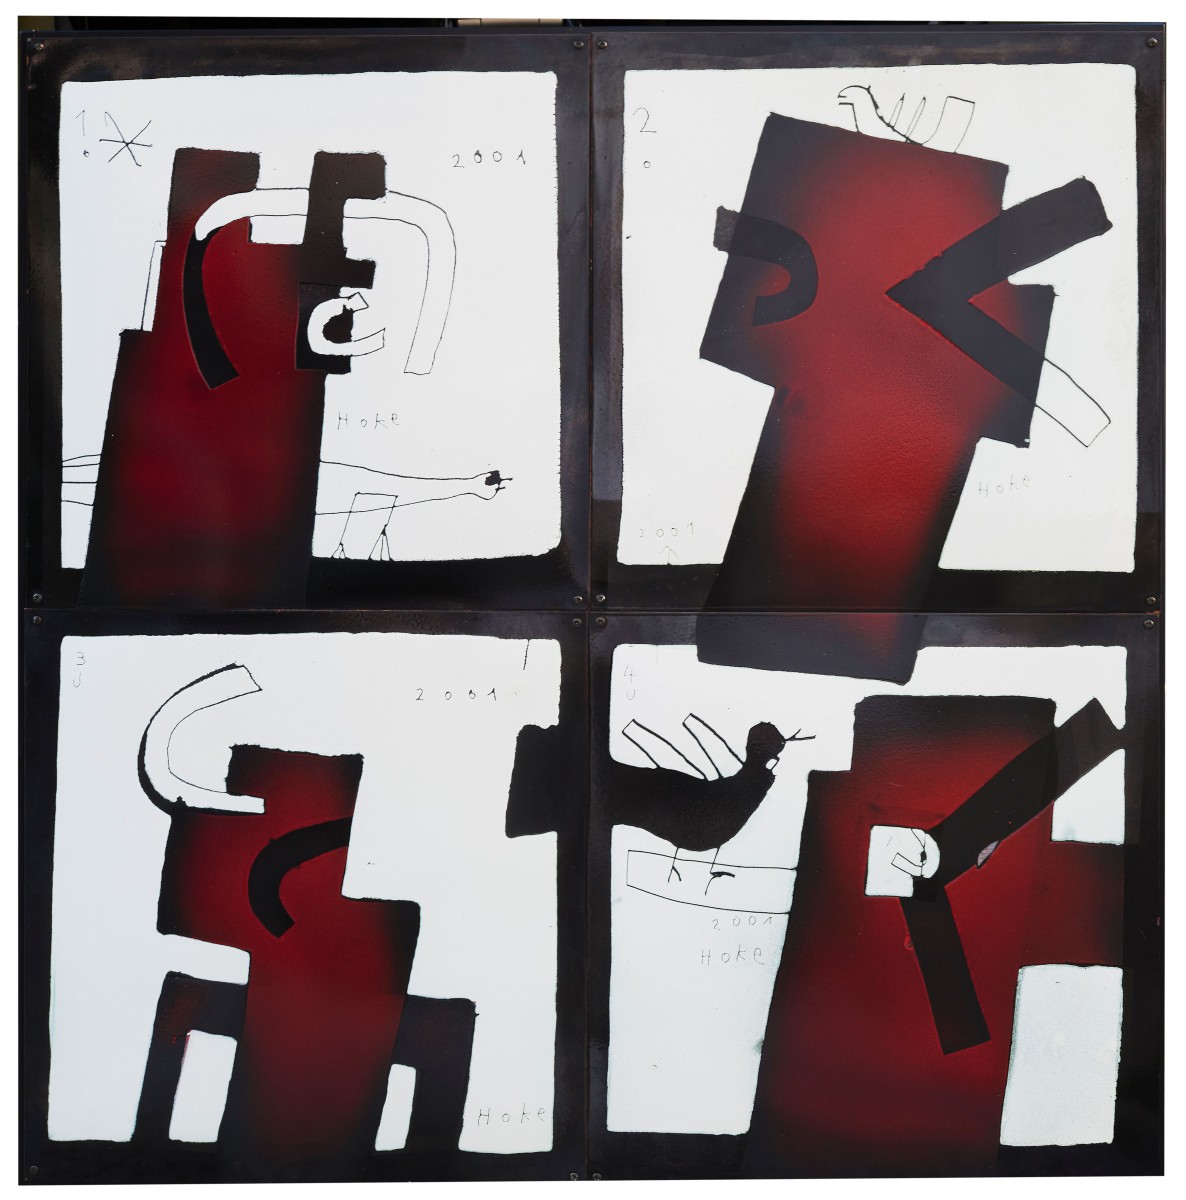 Giselbert Hoke (1927-2015), Untitled, 2001, Emeilearbeiten, each 50x50cm 1-4, total size 102x102cm, 4x signed and dated